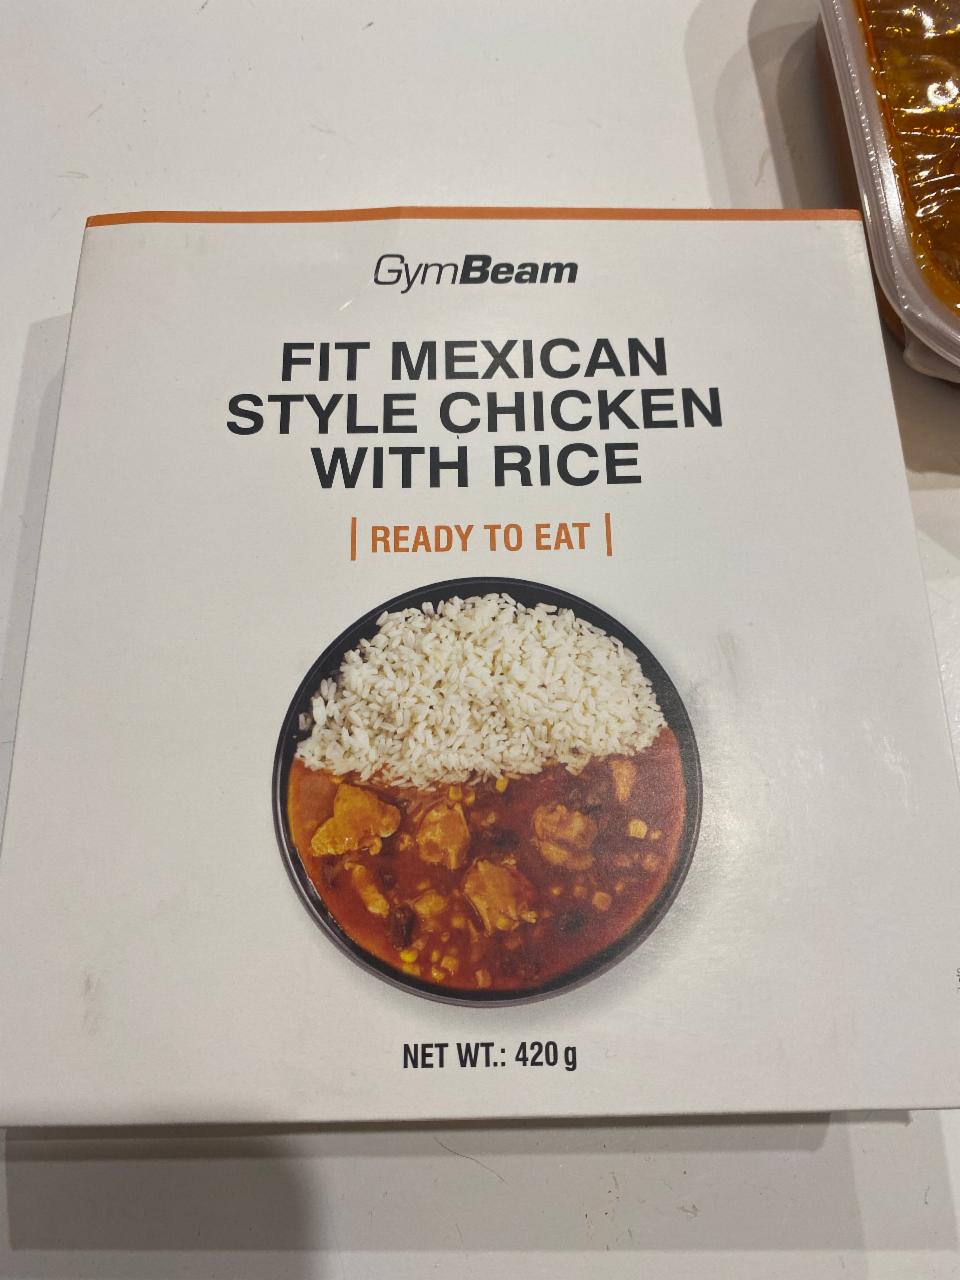 Képek - Fit mexican style chicken with rice GymBeam